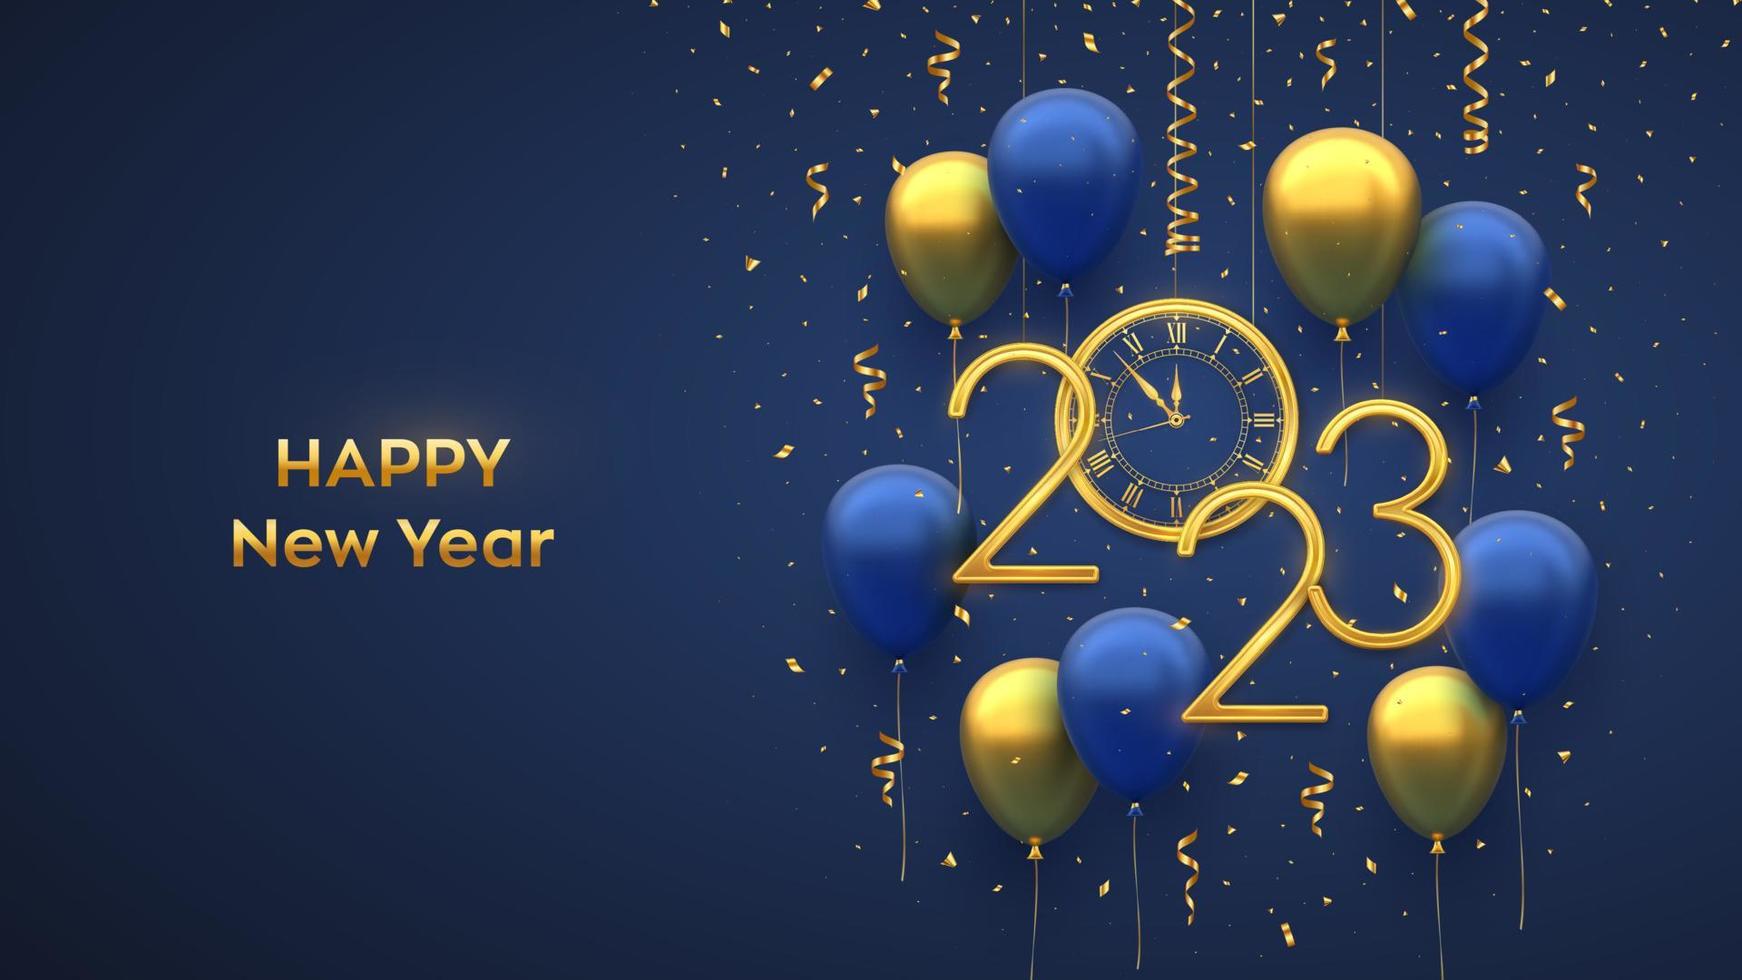 Happy New 2023 Year. Hanging Golden metallic numbers 2023, watch with Roman numeral and countdown midnight with 3D festive helium balloons and falling confetti on blue background. Vector illustration.